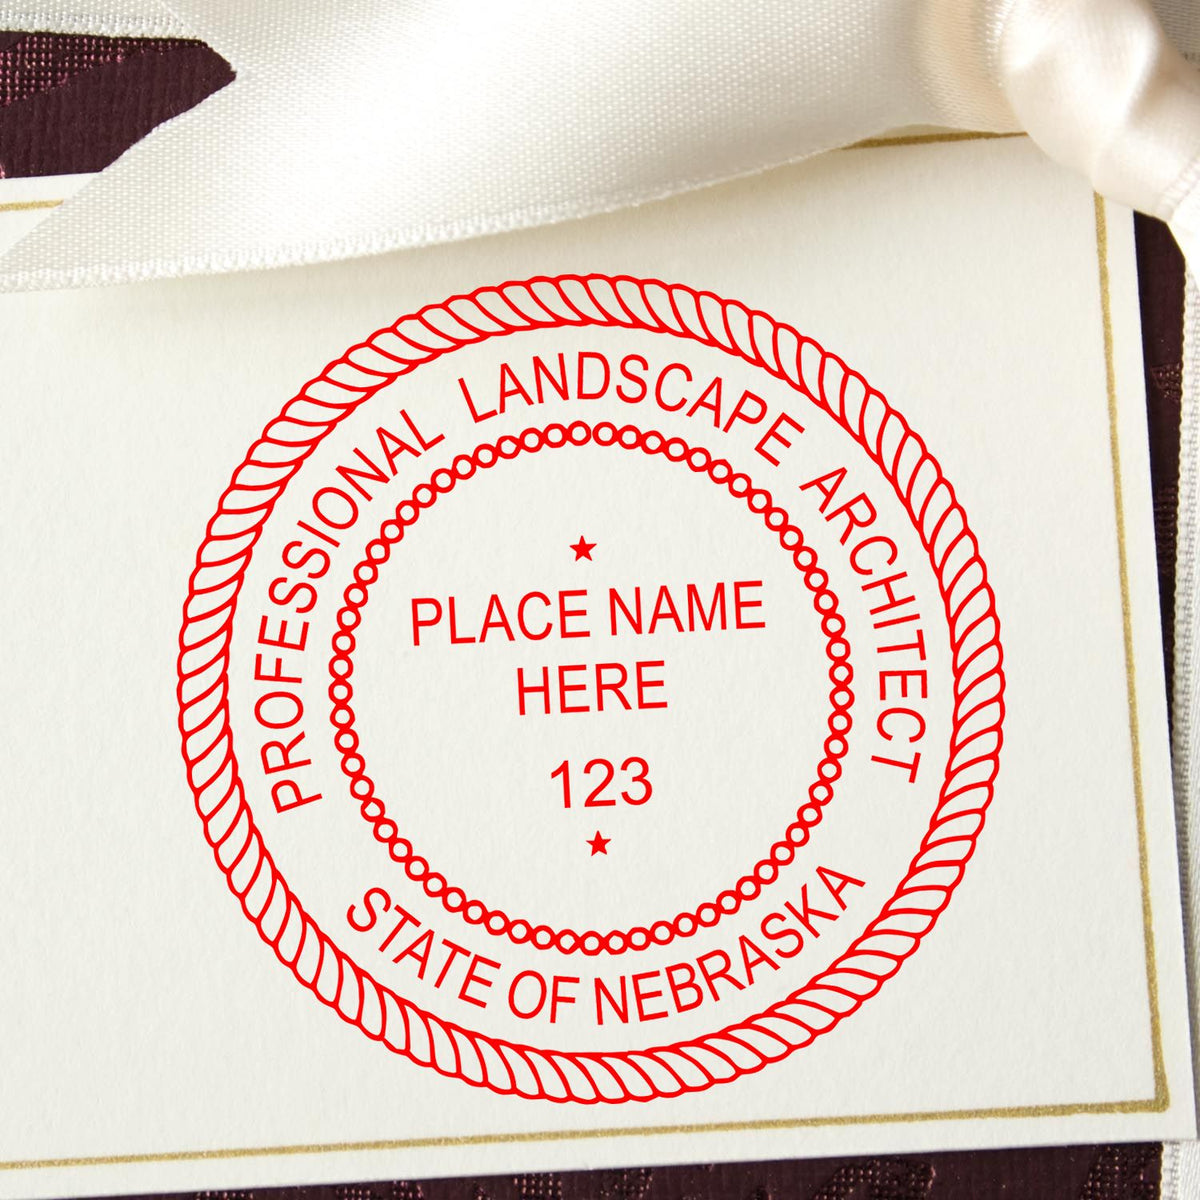 The Nebraska Landscape Architectural Seal Stamp stamp impression comes to life with a crisp, detailed photo on paper - showcasing true professional quality.